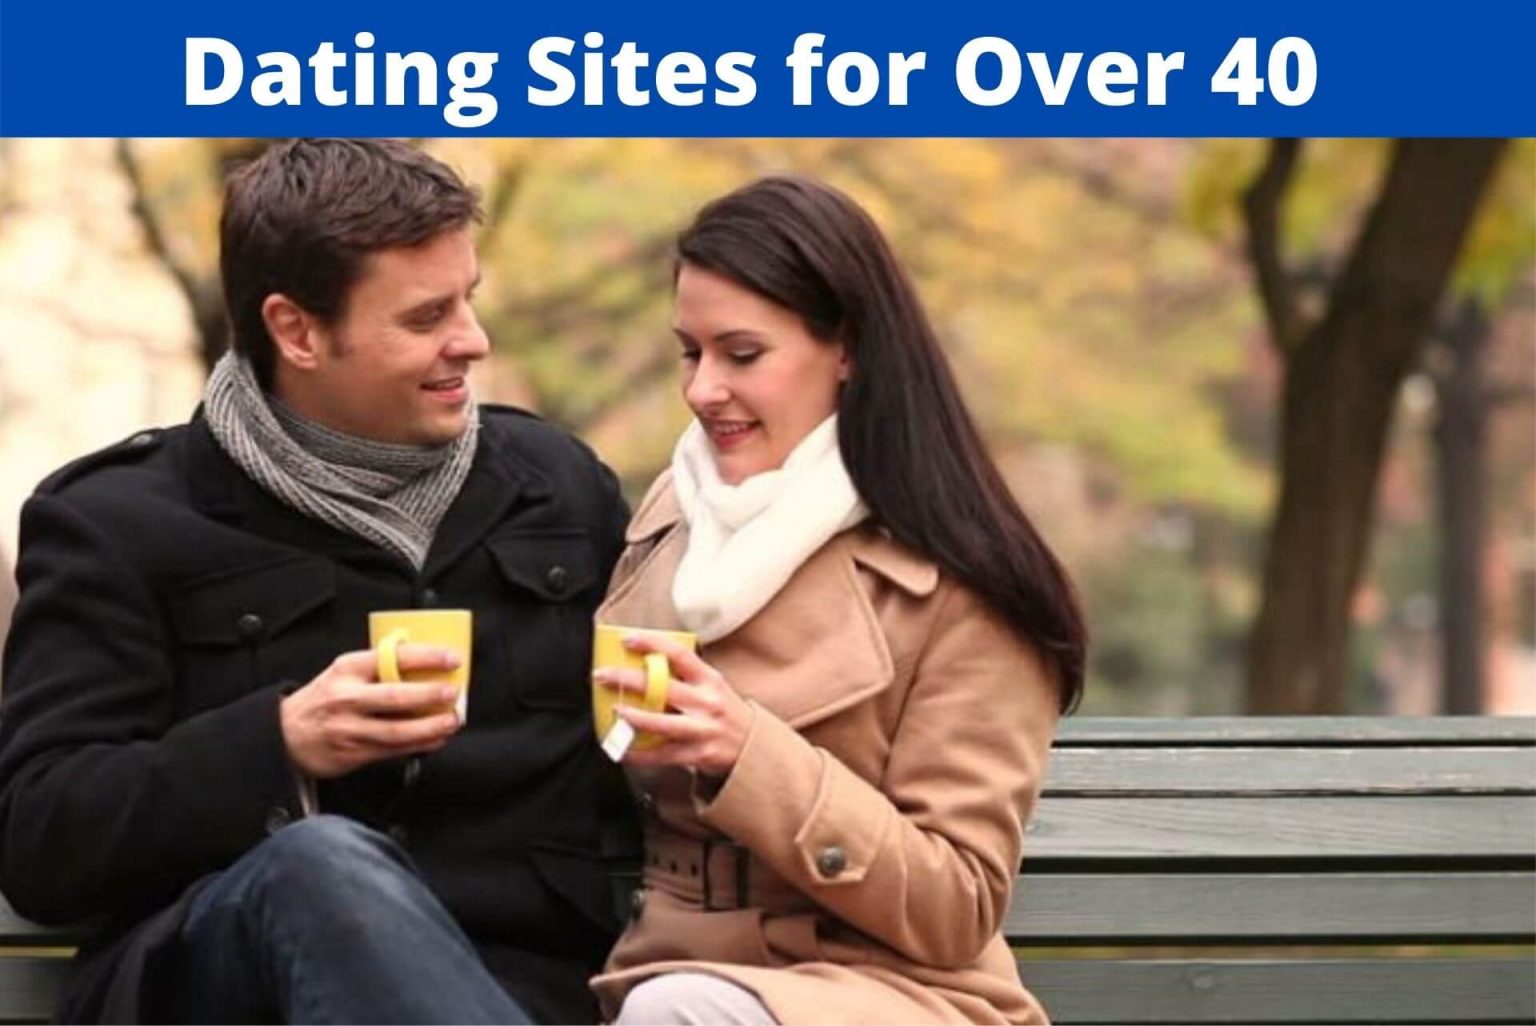 free dating sites for over 40